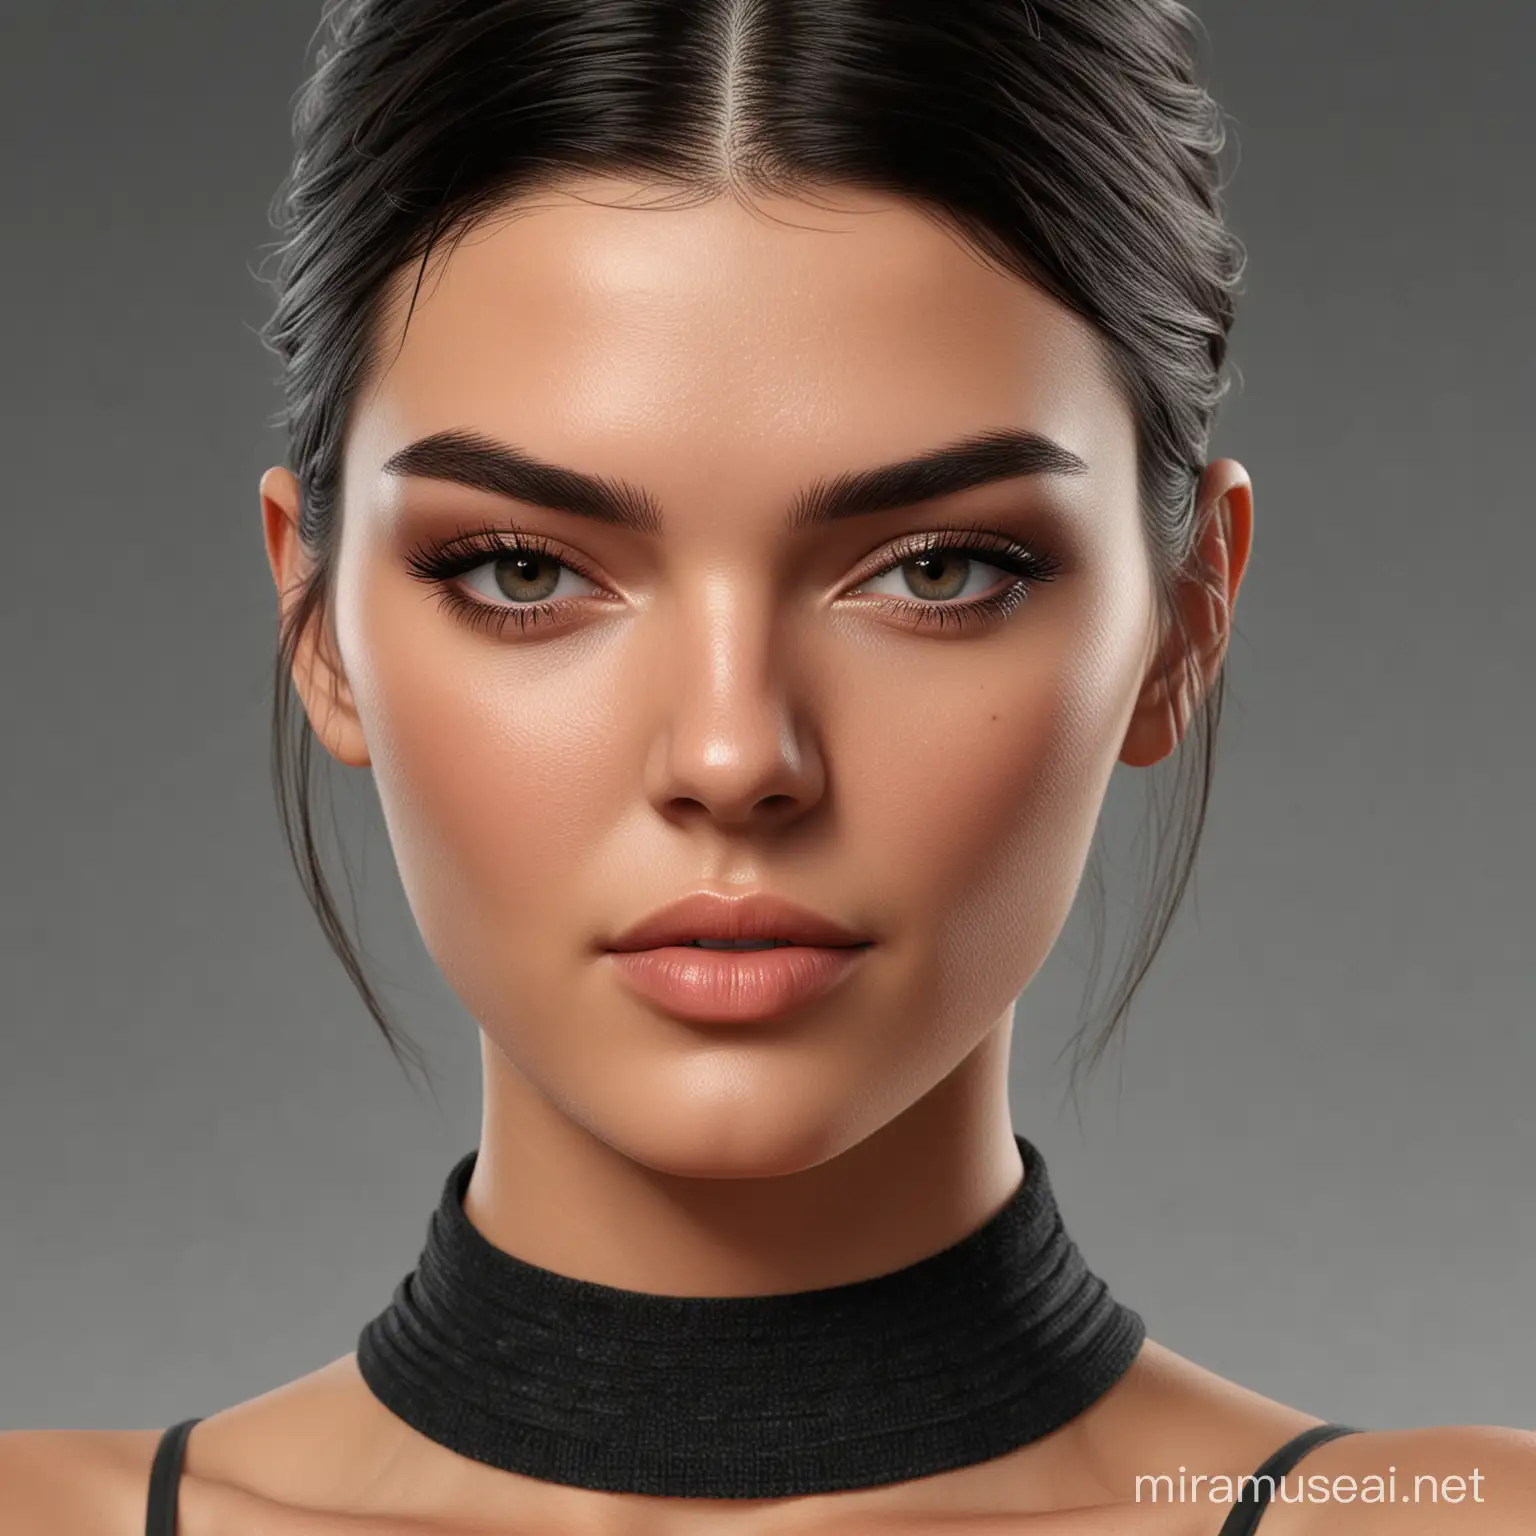 Kendall Jenner Portrait with Realistic Details in Studio Setting